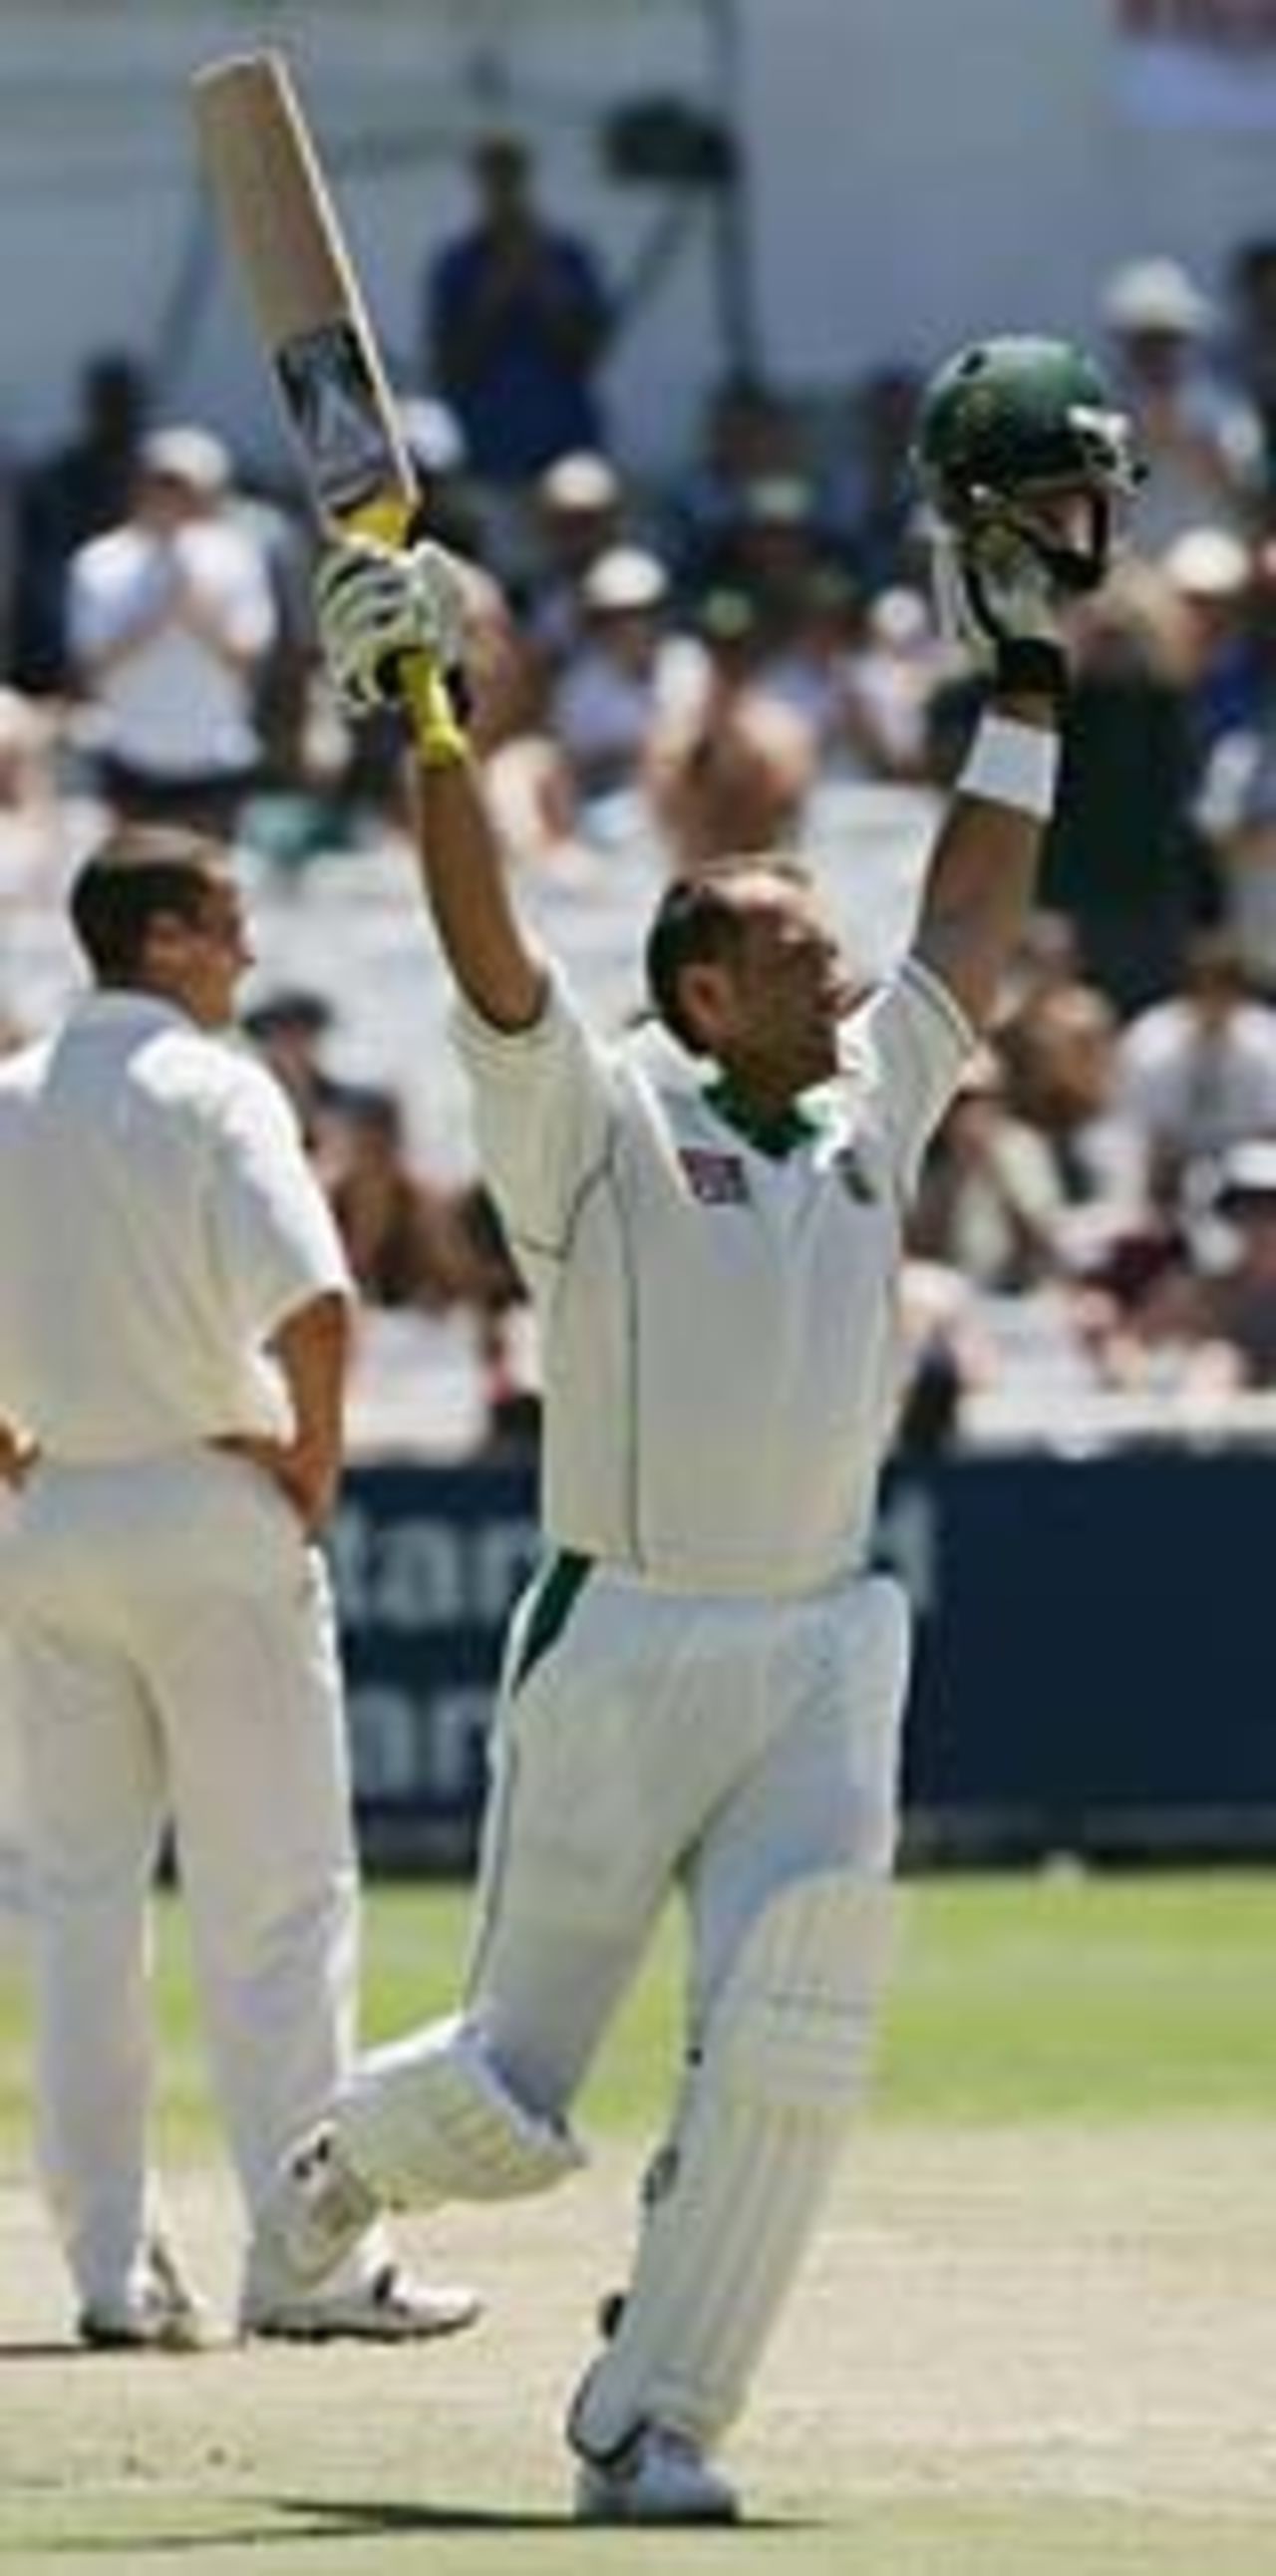 Jacques Kallis reaches his 19th Test hundred, South Africa v England, 3rd Test, Cape Town, 2nd day, January 3, 2005